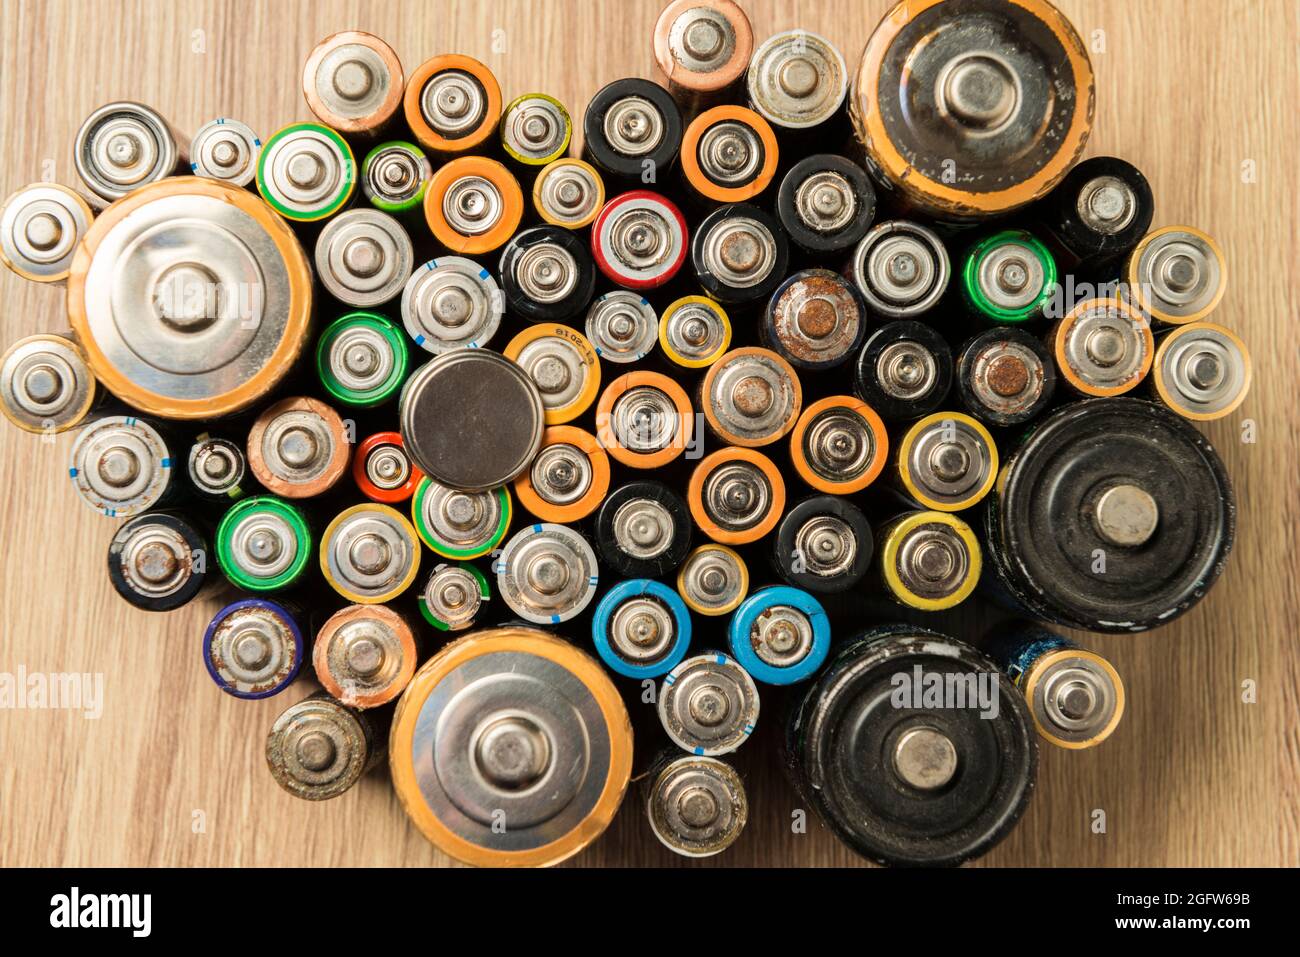 Flat batteries placed neatly on a wooden table. Concept of recycling and care for the environment. Stock Photo